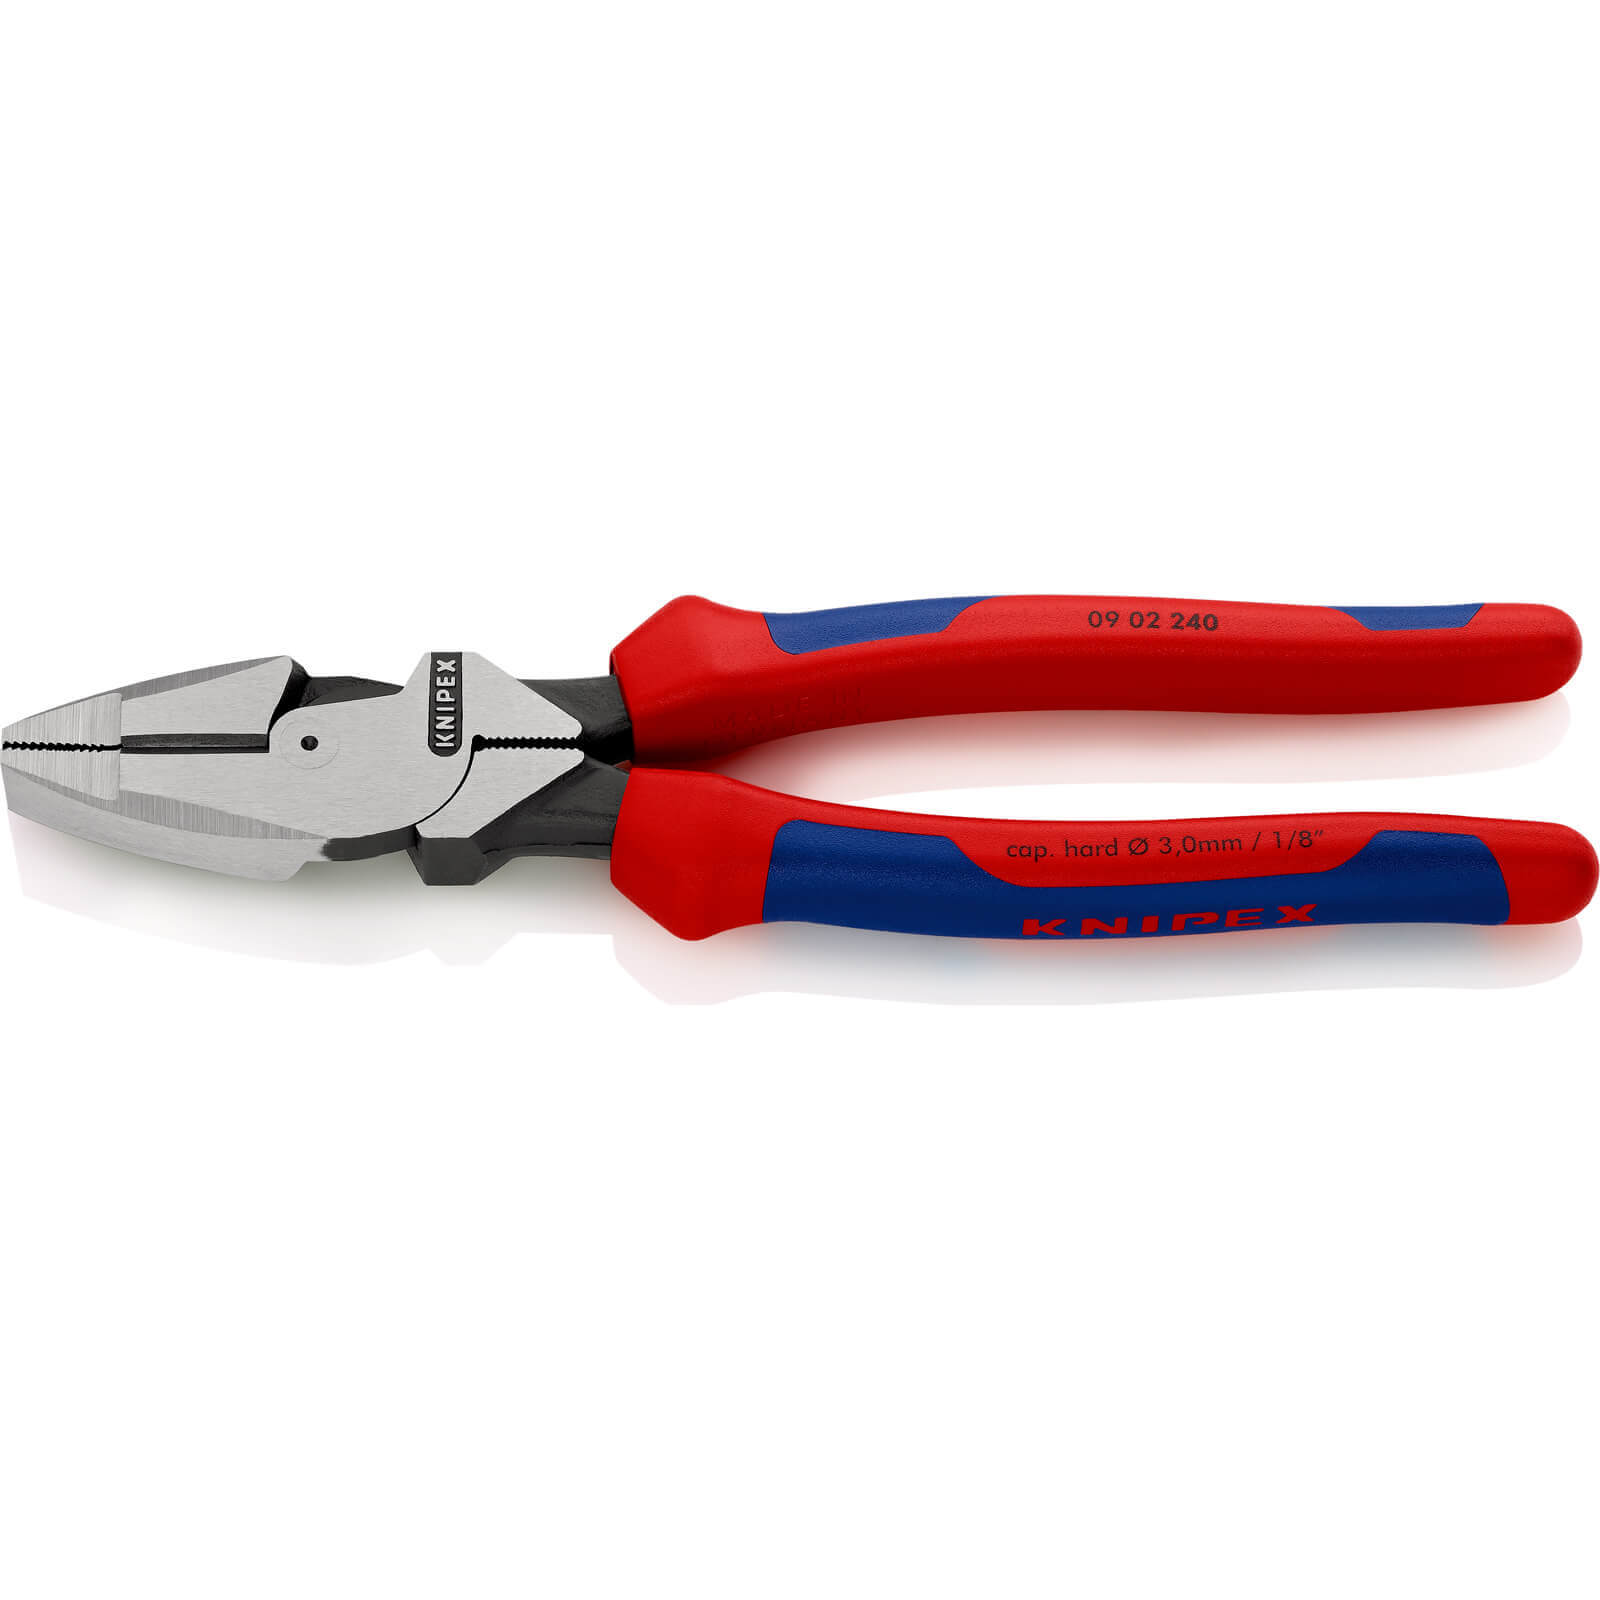 Image of Knipex 09 02 Lineman Pliers 240mm